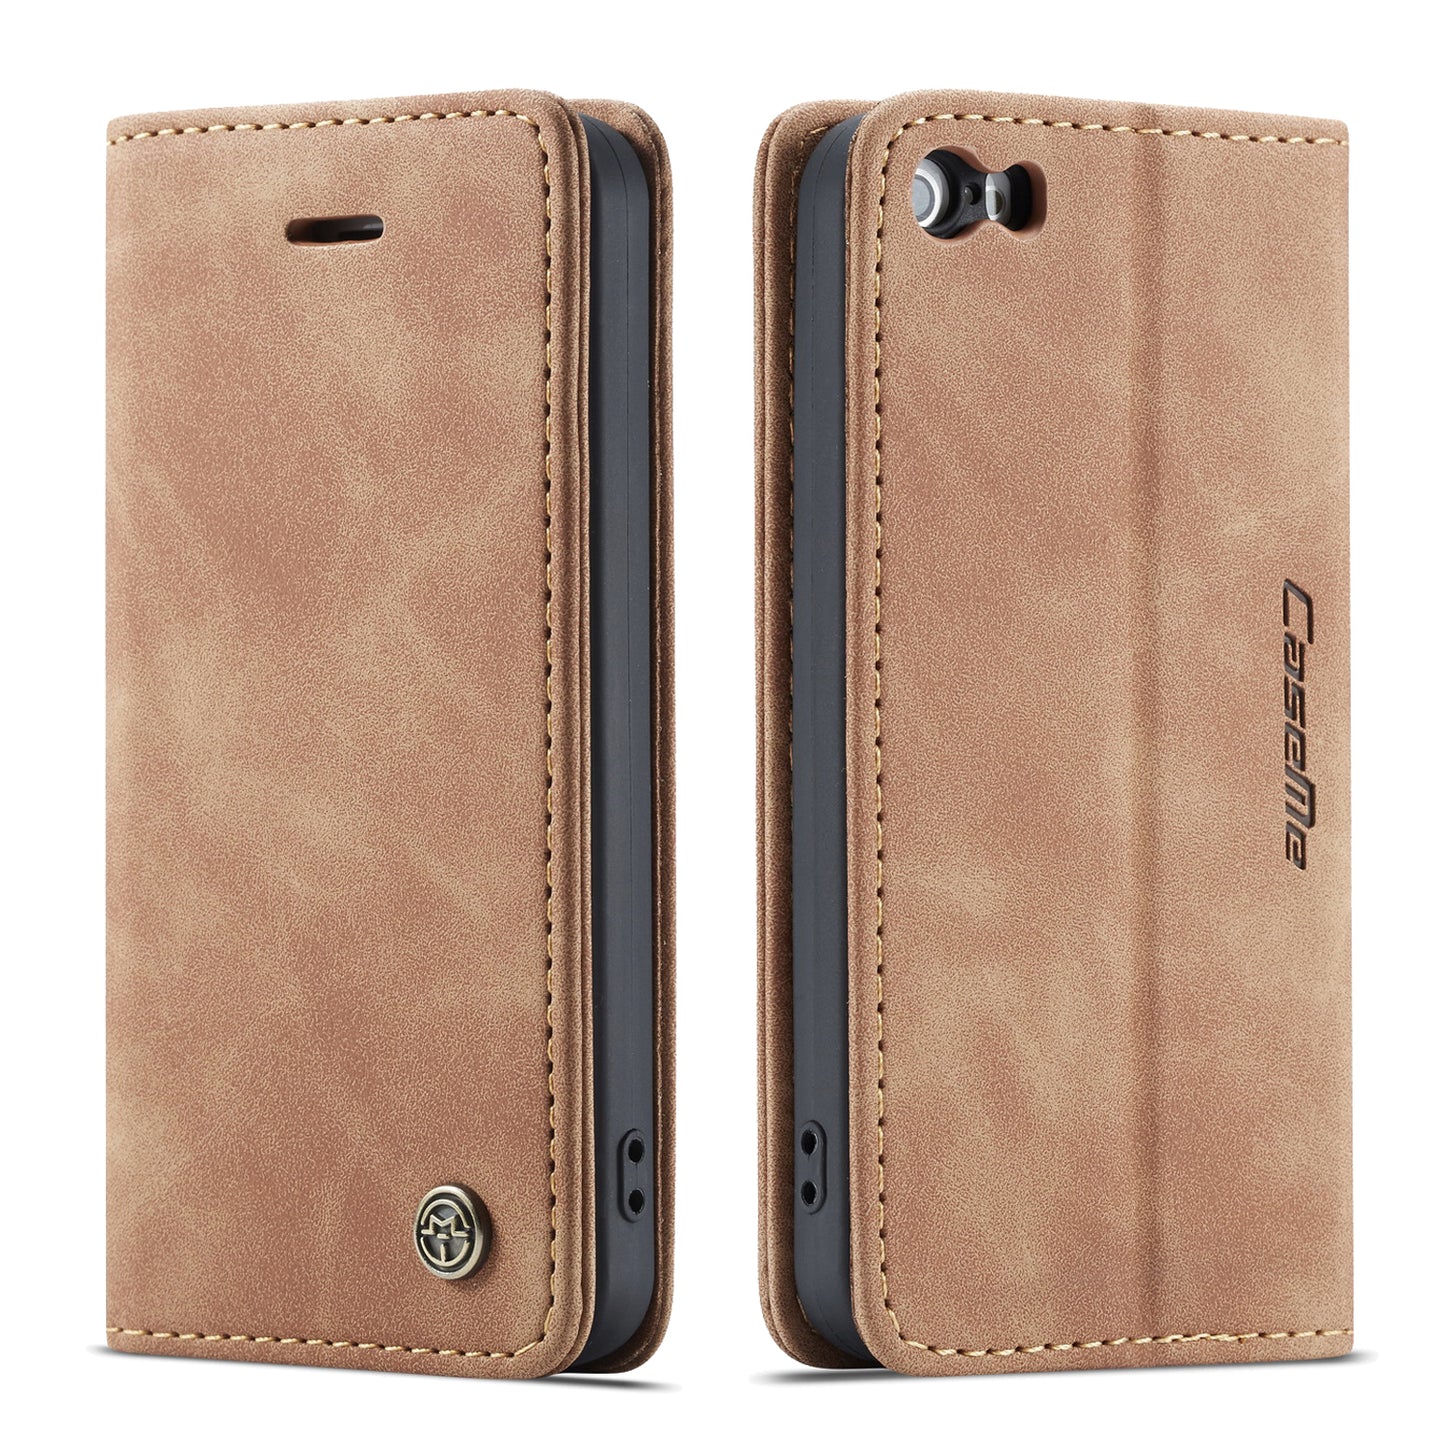 Book Classical iPhone 5/5s Leather Case Retro Slim Wallet Stand